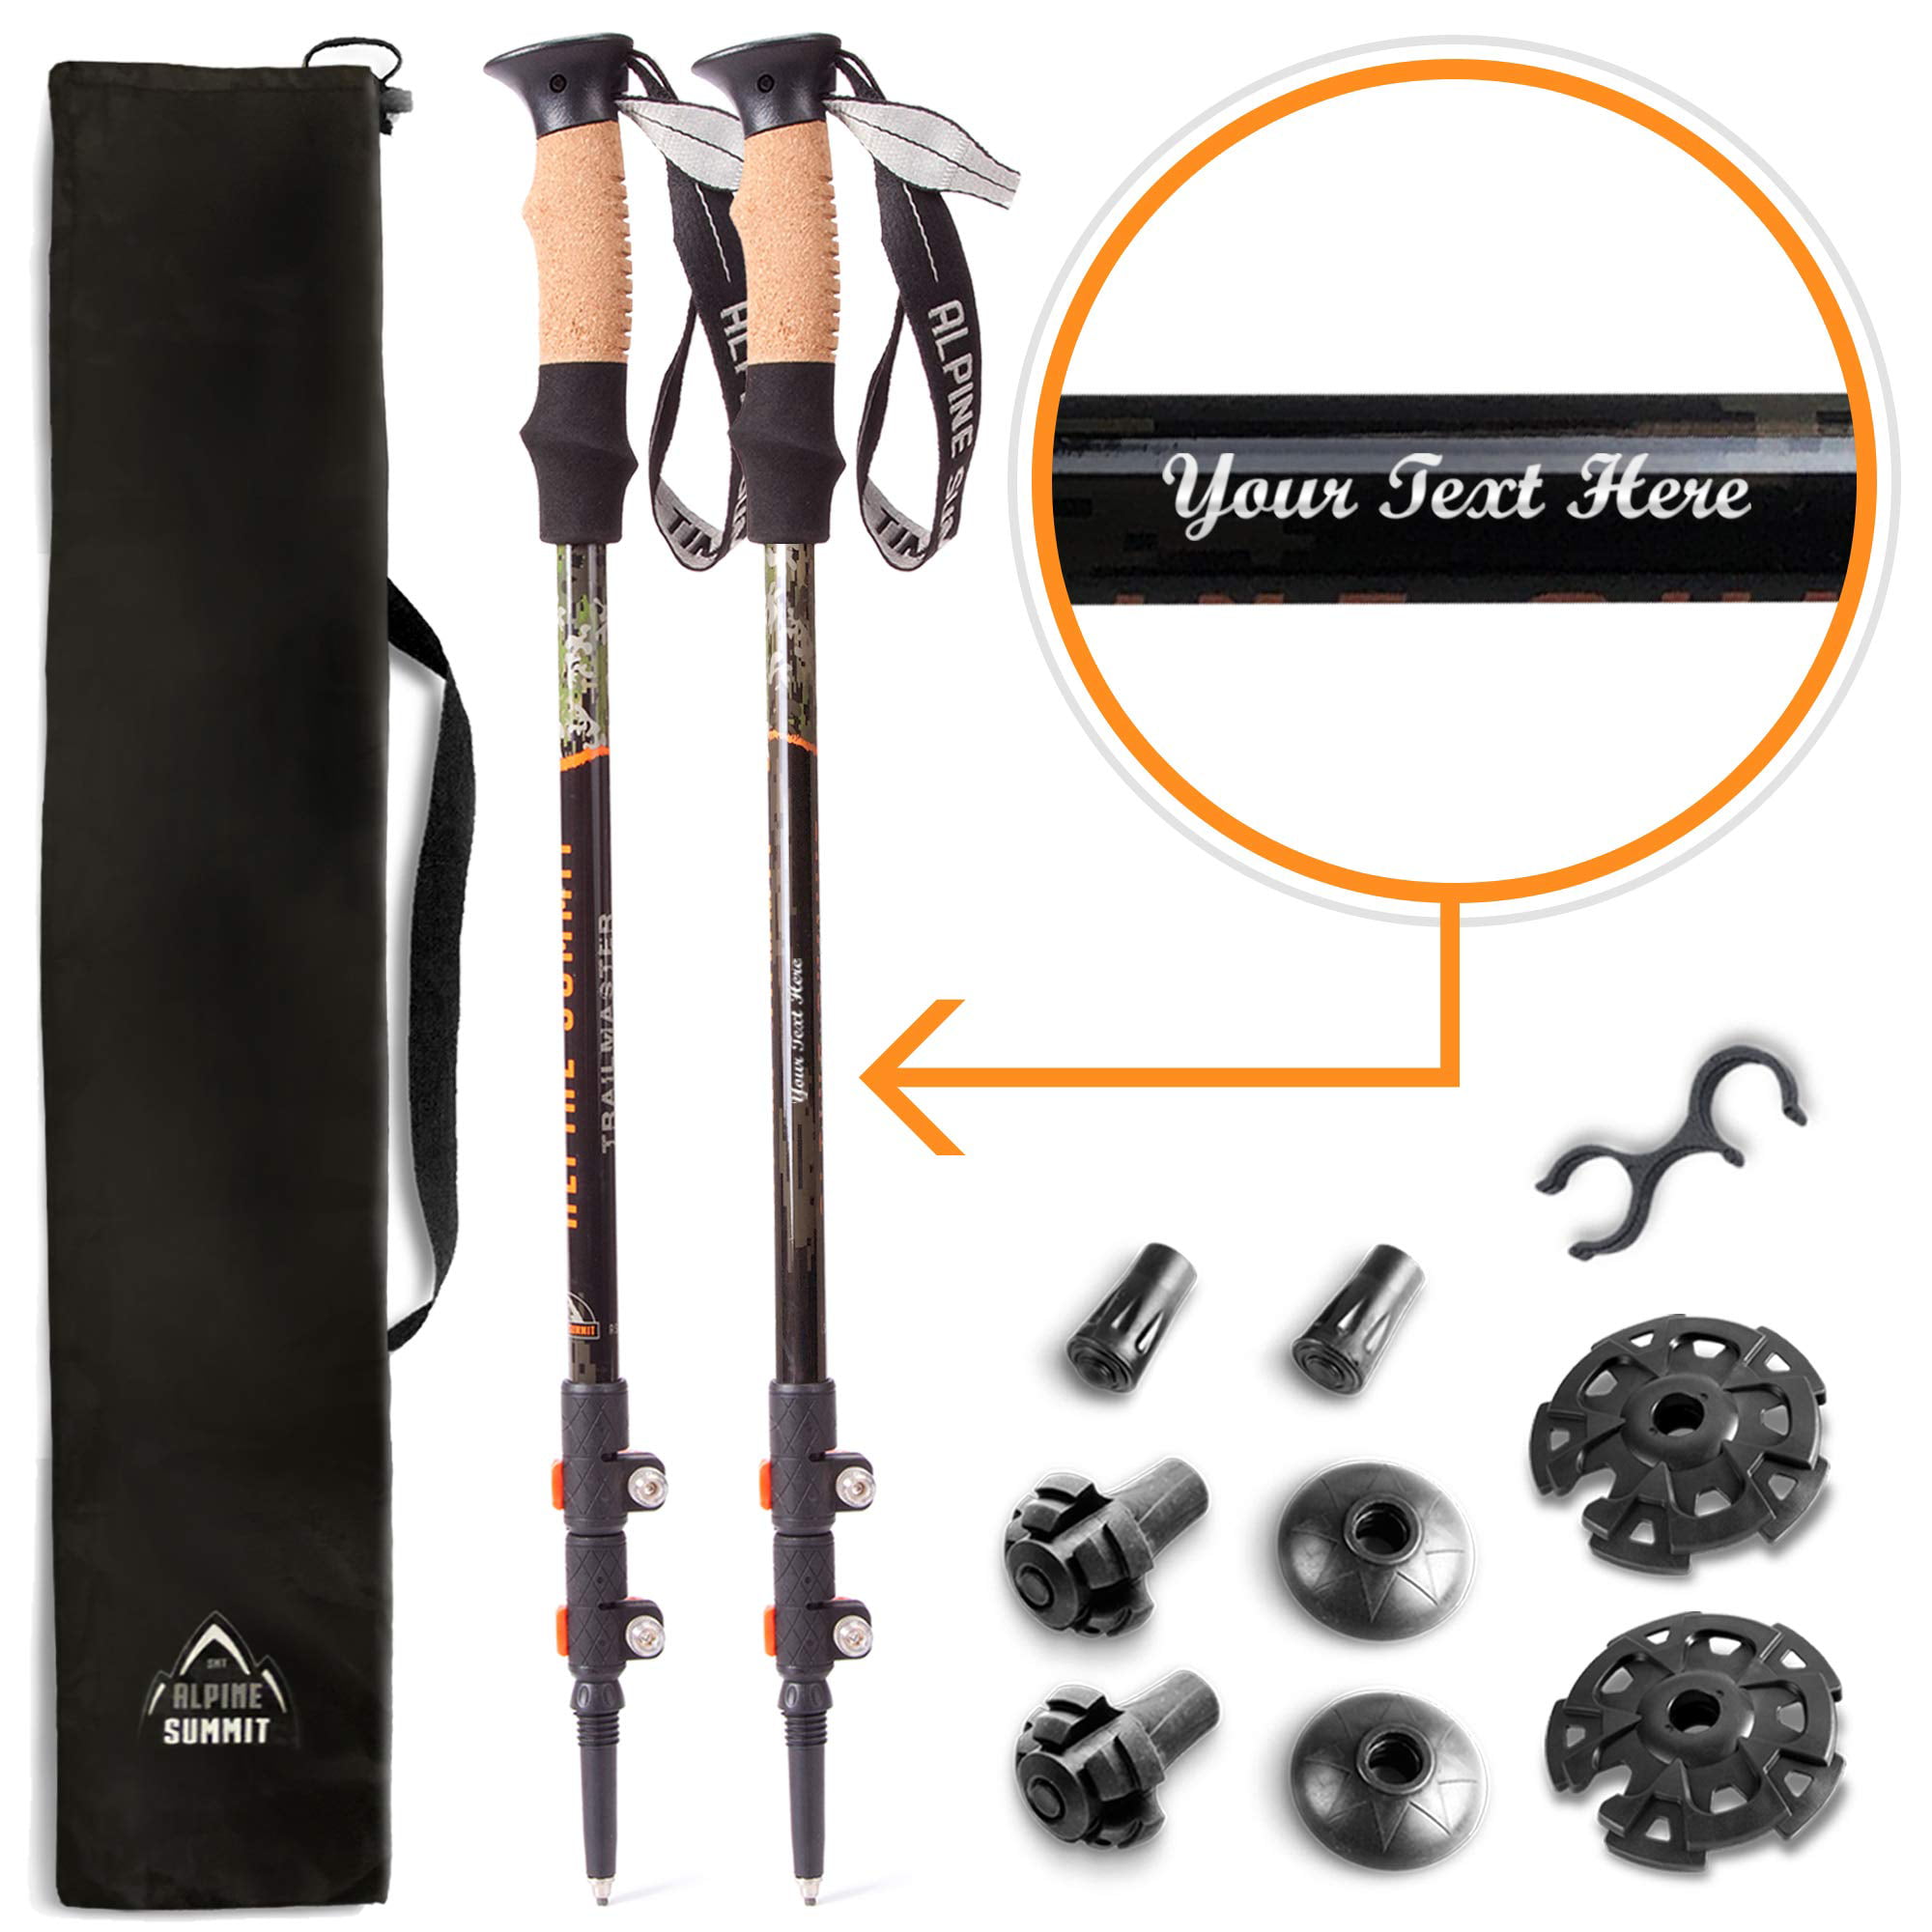 Enjoy The Great Outdoors Walking Sticks with Strong and Lightweight 7075 Aluminum and Cork Grips Alpine Summit Hiking/Trekking Poles with Quick Locks 